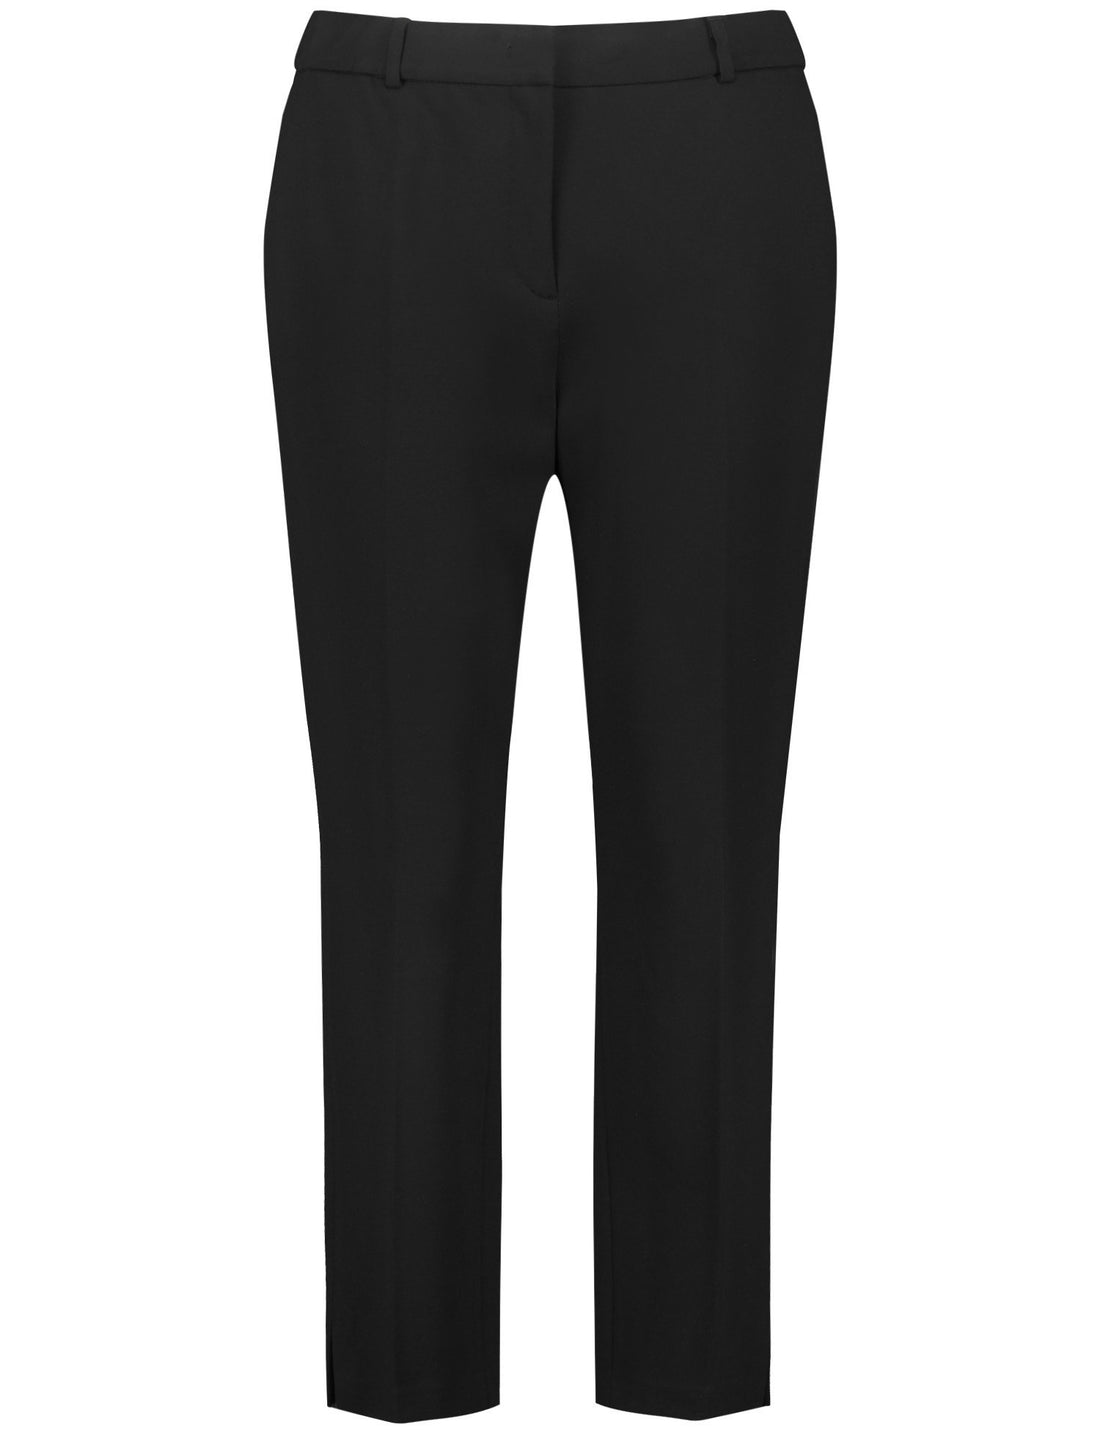 Greta Sophisticated 7/8-Length Trousers_920981-29038_1100_02